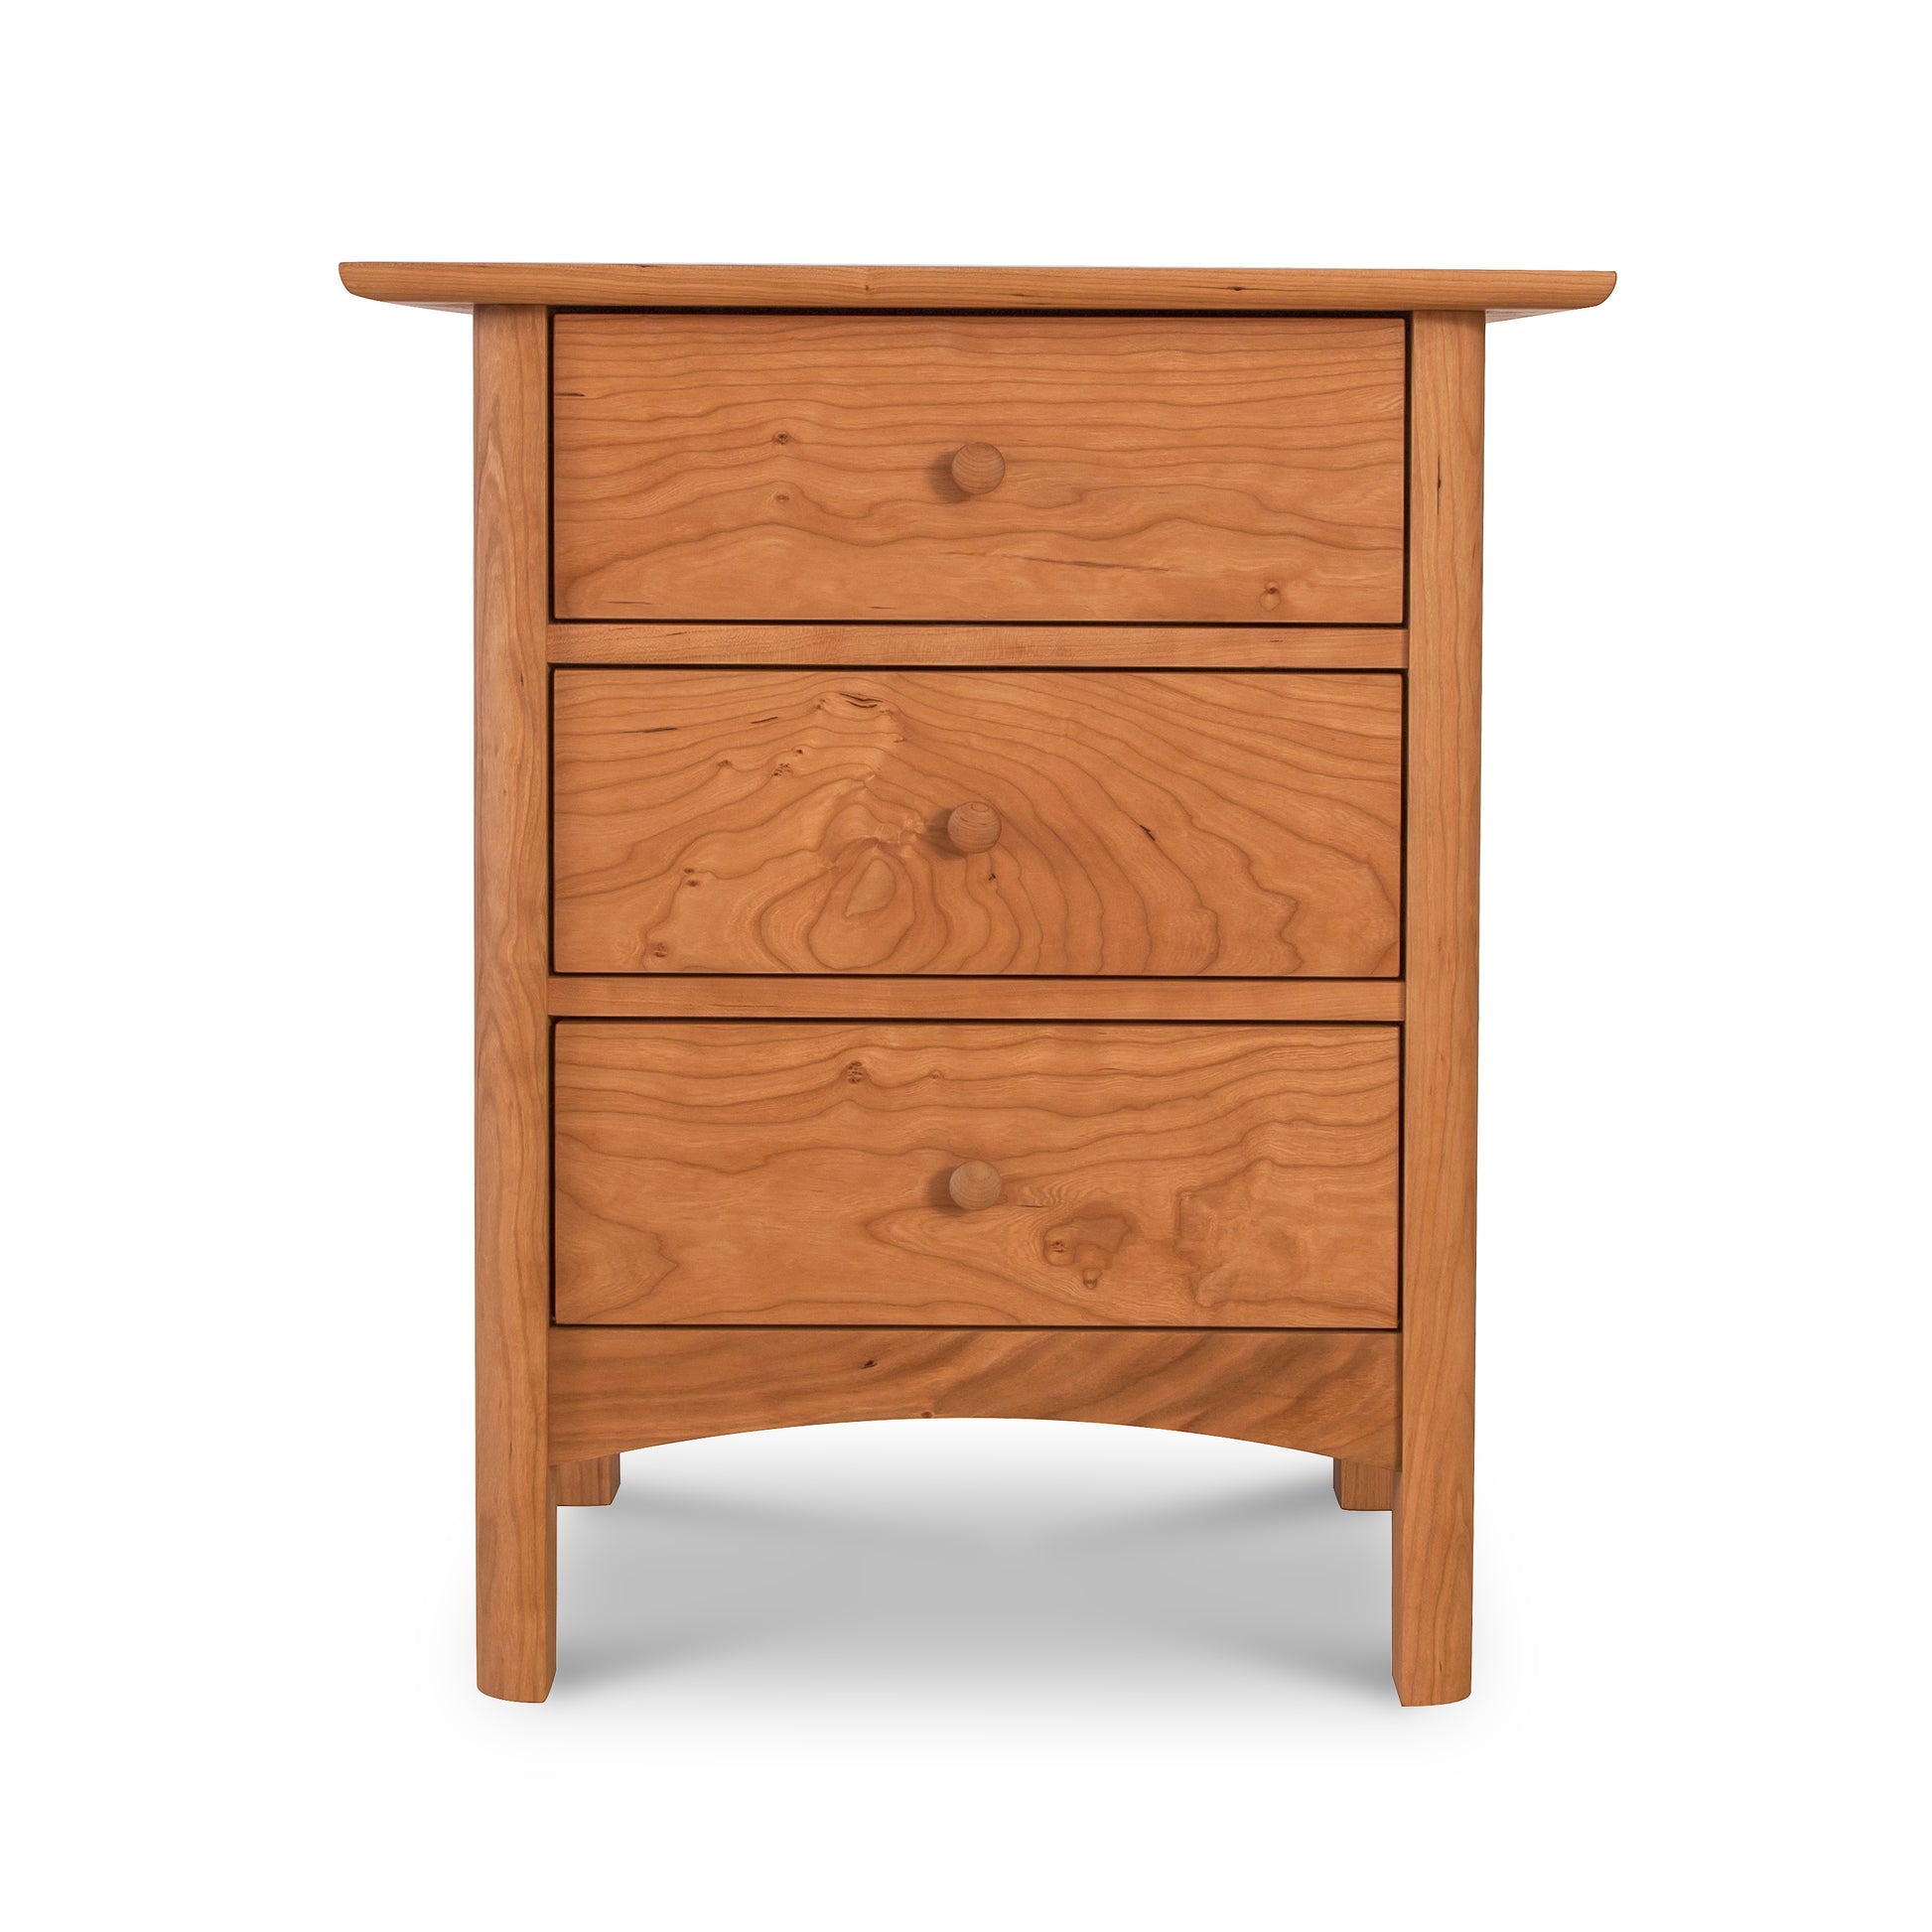 A luxury Heartwood Shaker 3-Drawer Nightstand handcrafted by Vermont Furniture Designs.